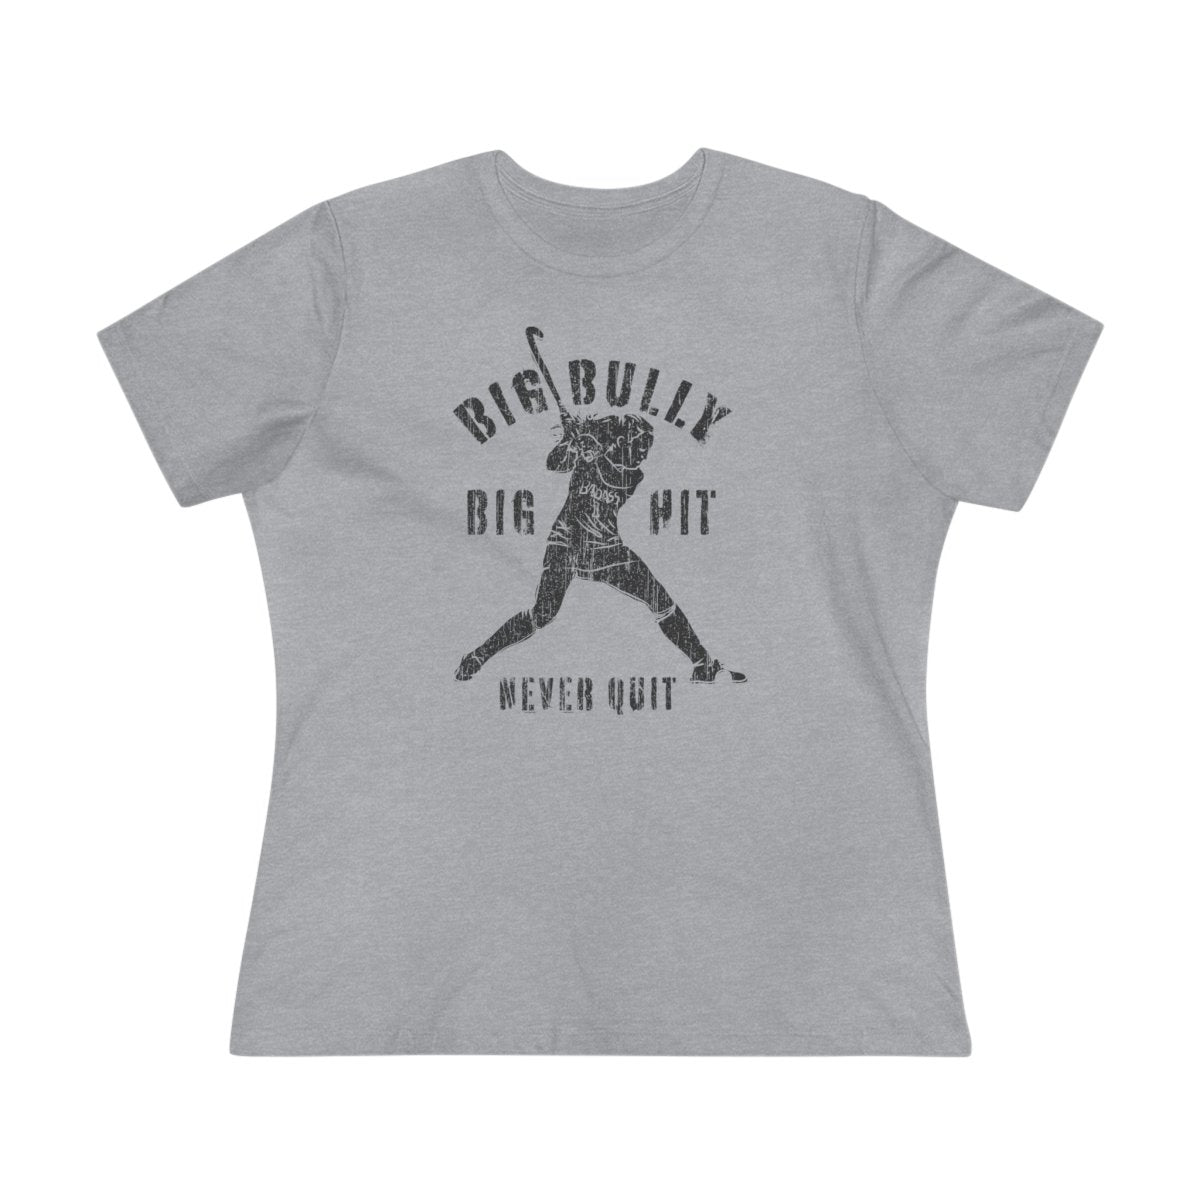 Field Hockey Women's Premium Relaxed Fit T-Shirt, Big Bully, Big Hit, Never Quit